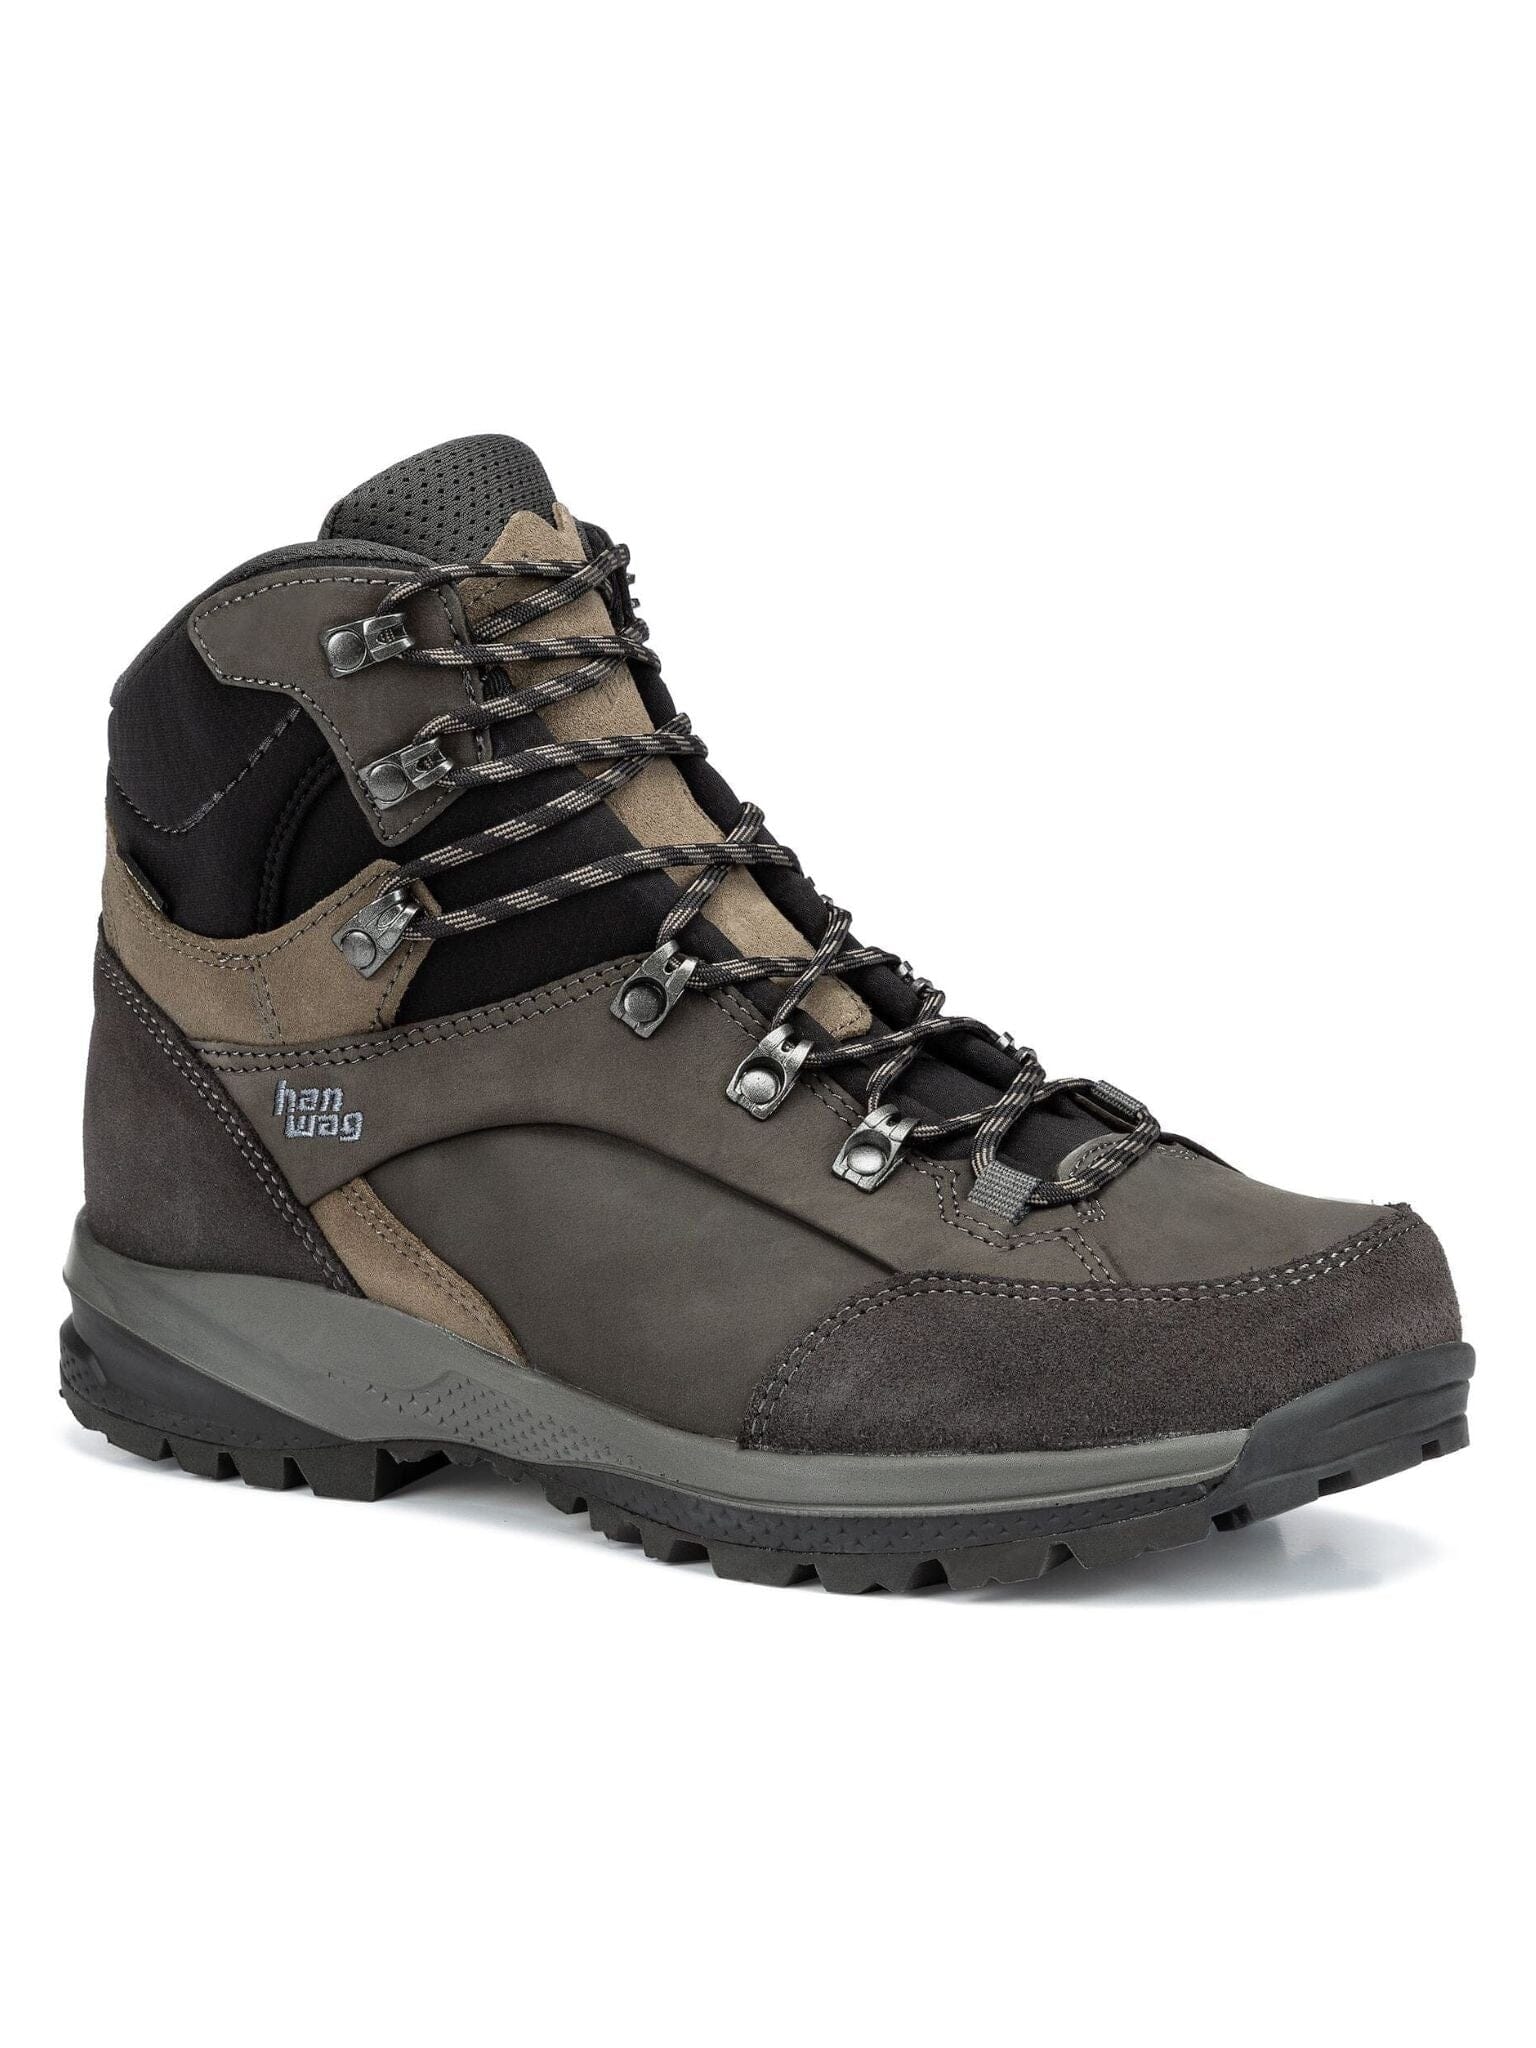 M's Banks SF Extra GTX - Leather Working Group -certified nubuck leather - Asphalt/Light Brown